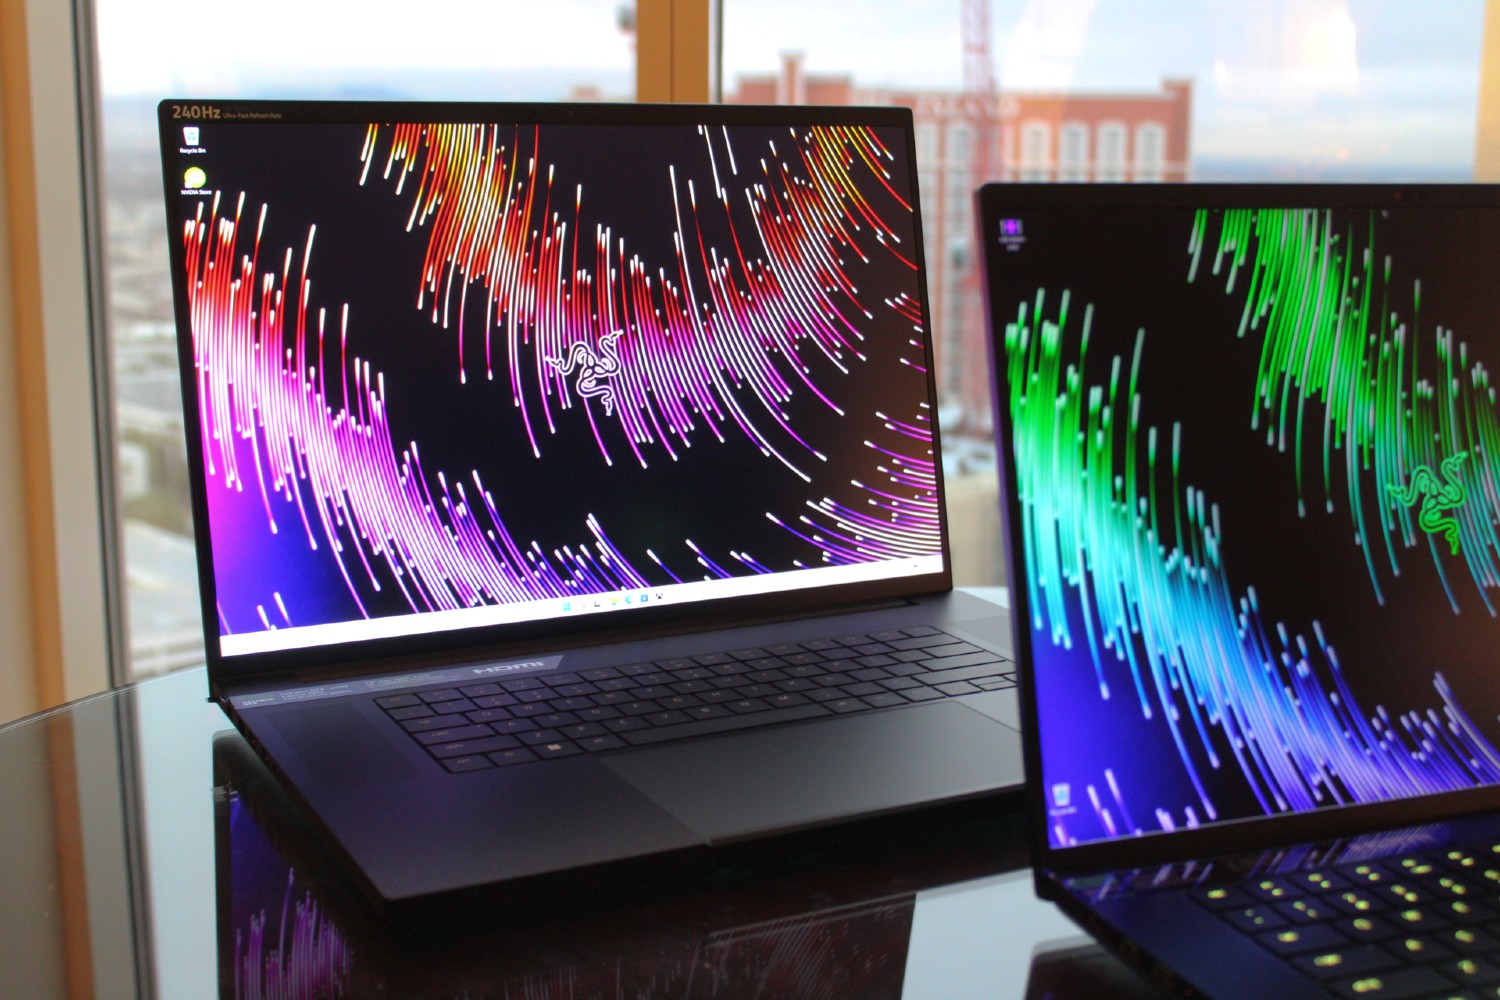 Razer Blade 16 review: A dual-mode display marvel, but it can't beat the  Blade 15 